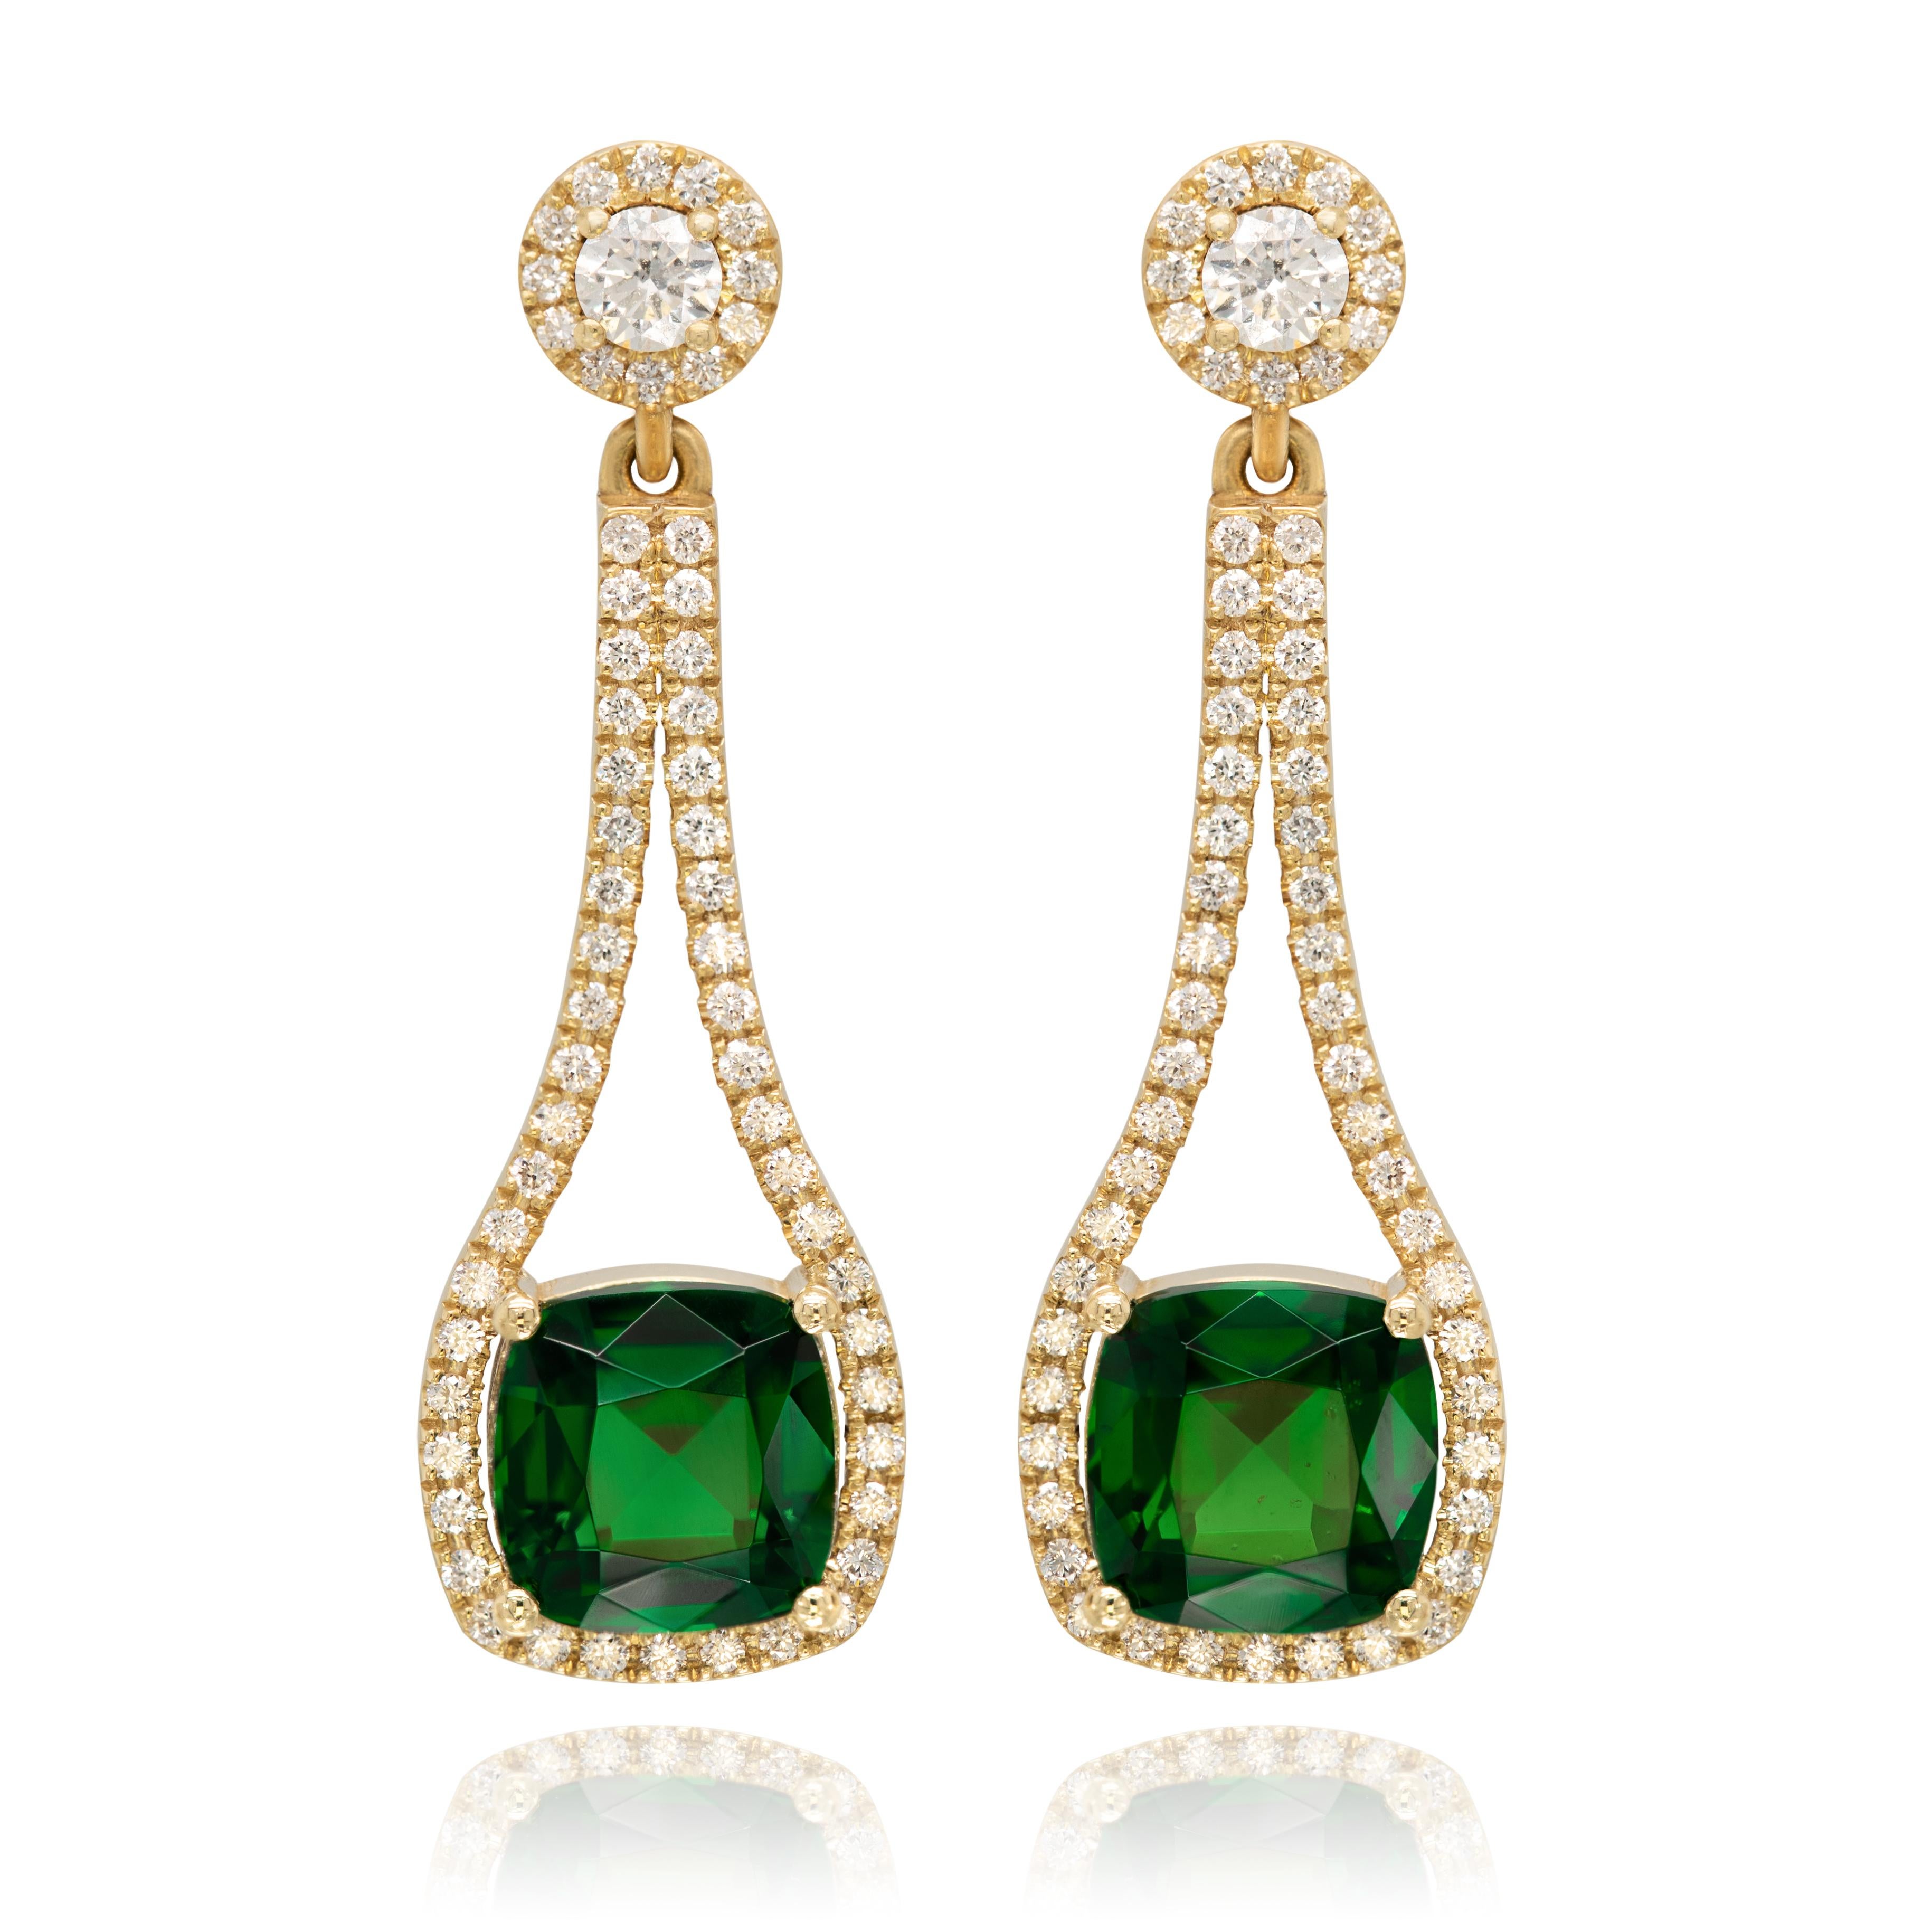 Natural Tourmalines 4.57 Carats set in 18K Yellow Gold Earrings with Diamonds 1